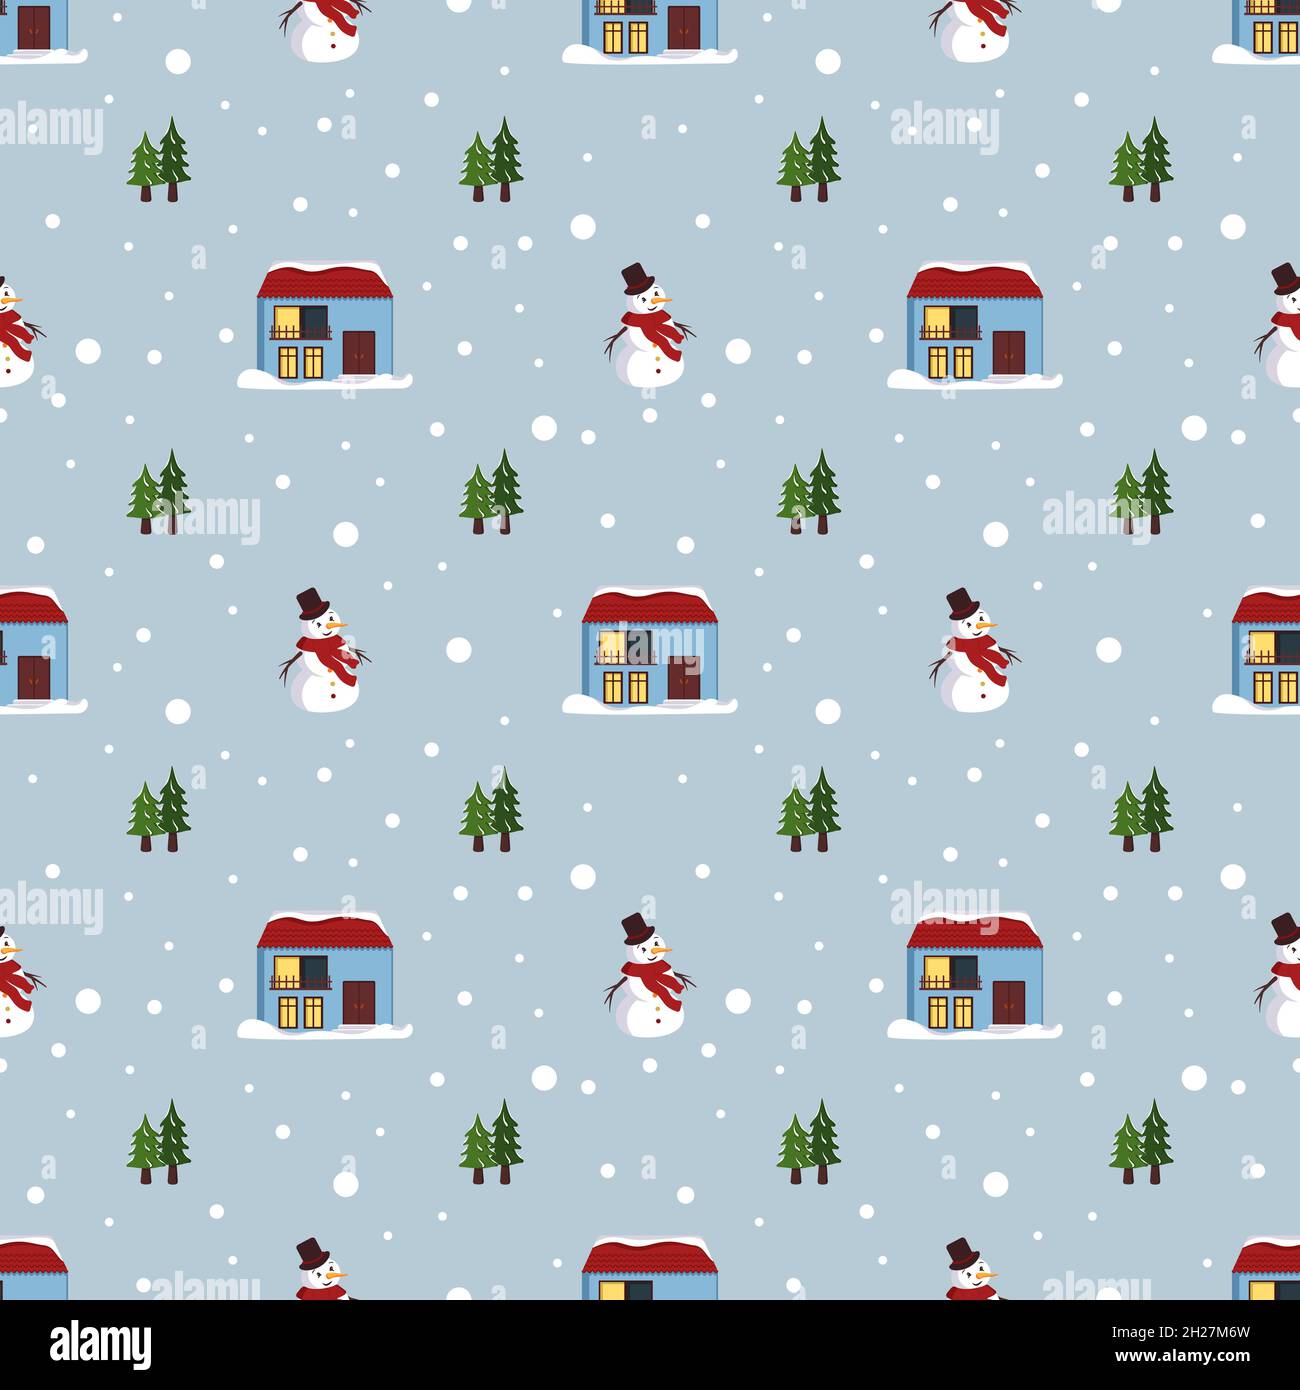 Seamless pattern with festive Christmas houses, snowman, trees and snowflakes on blue background. Bright print for the New Year and winter holidays for wrapping paper, textiles and design. Stock Vector